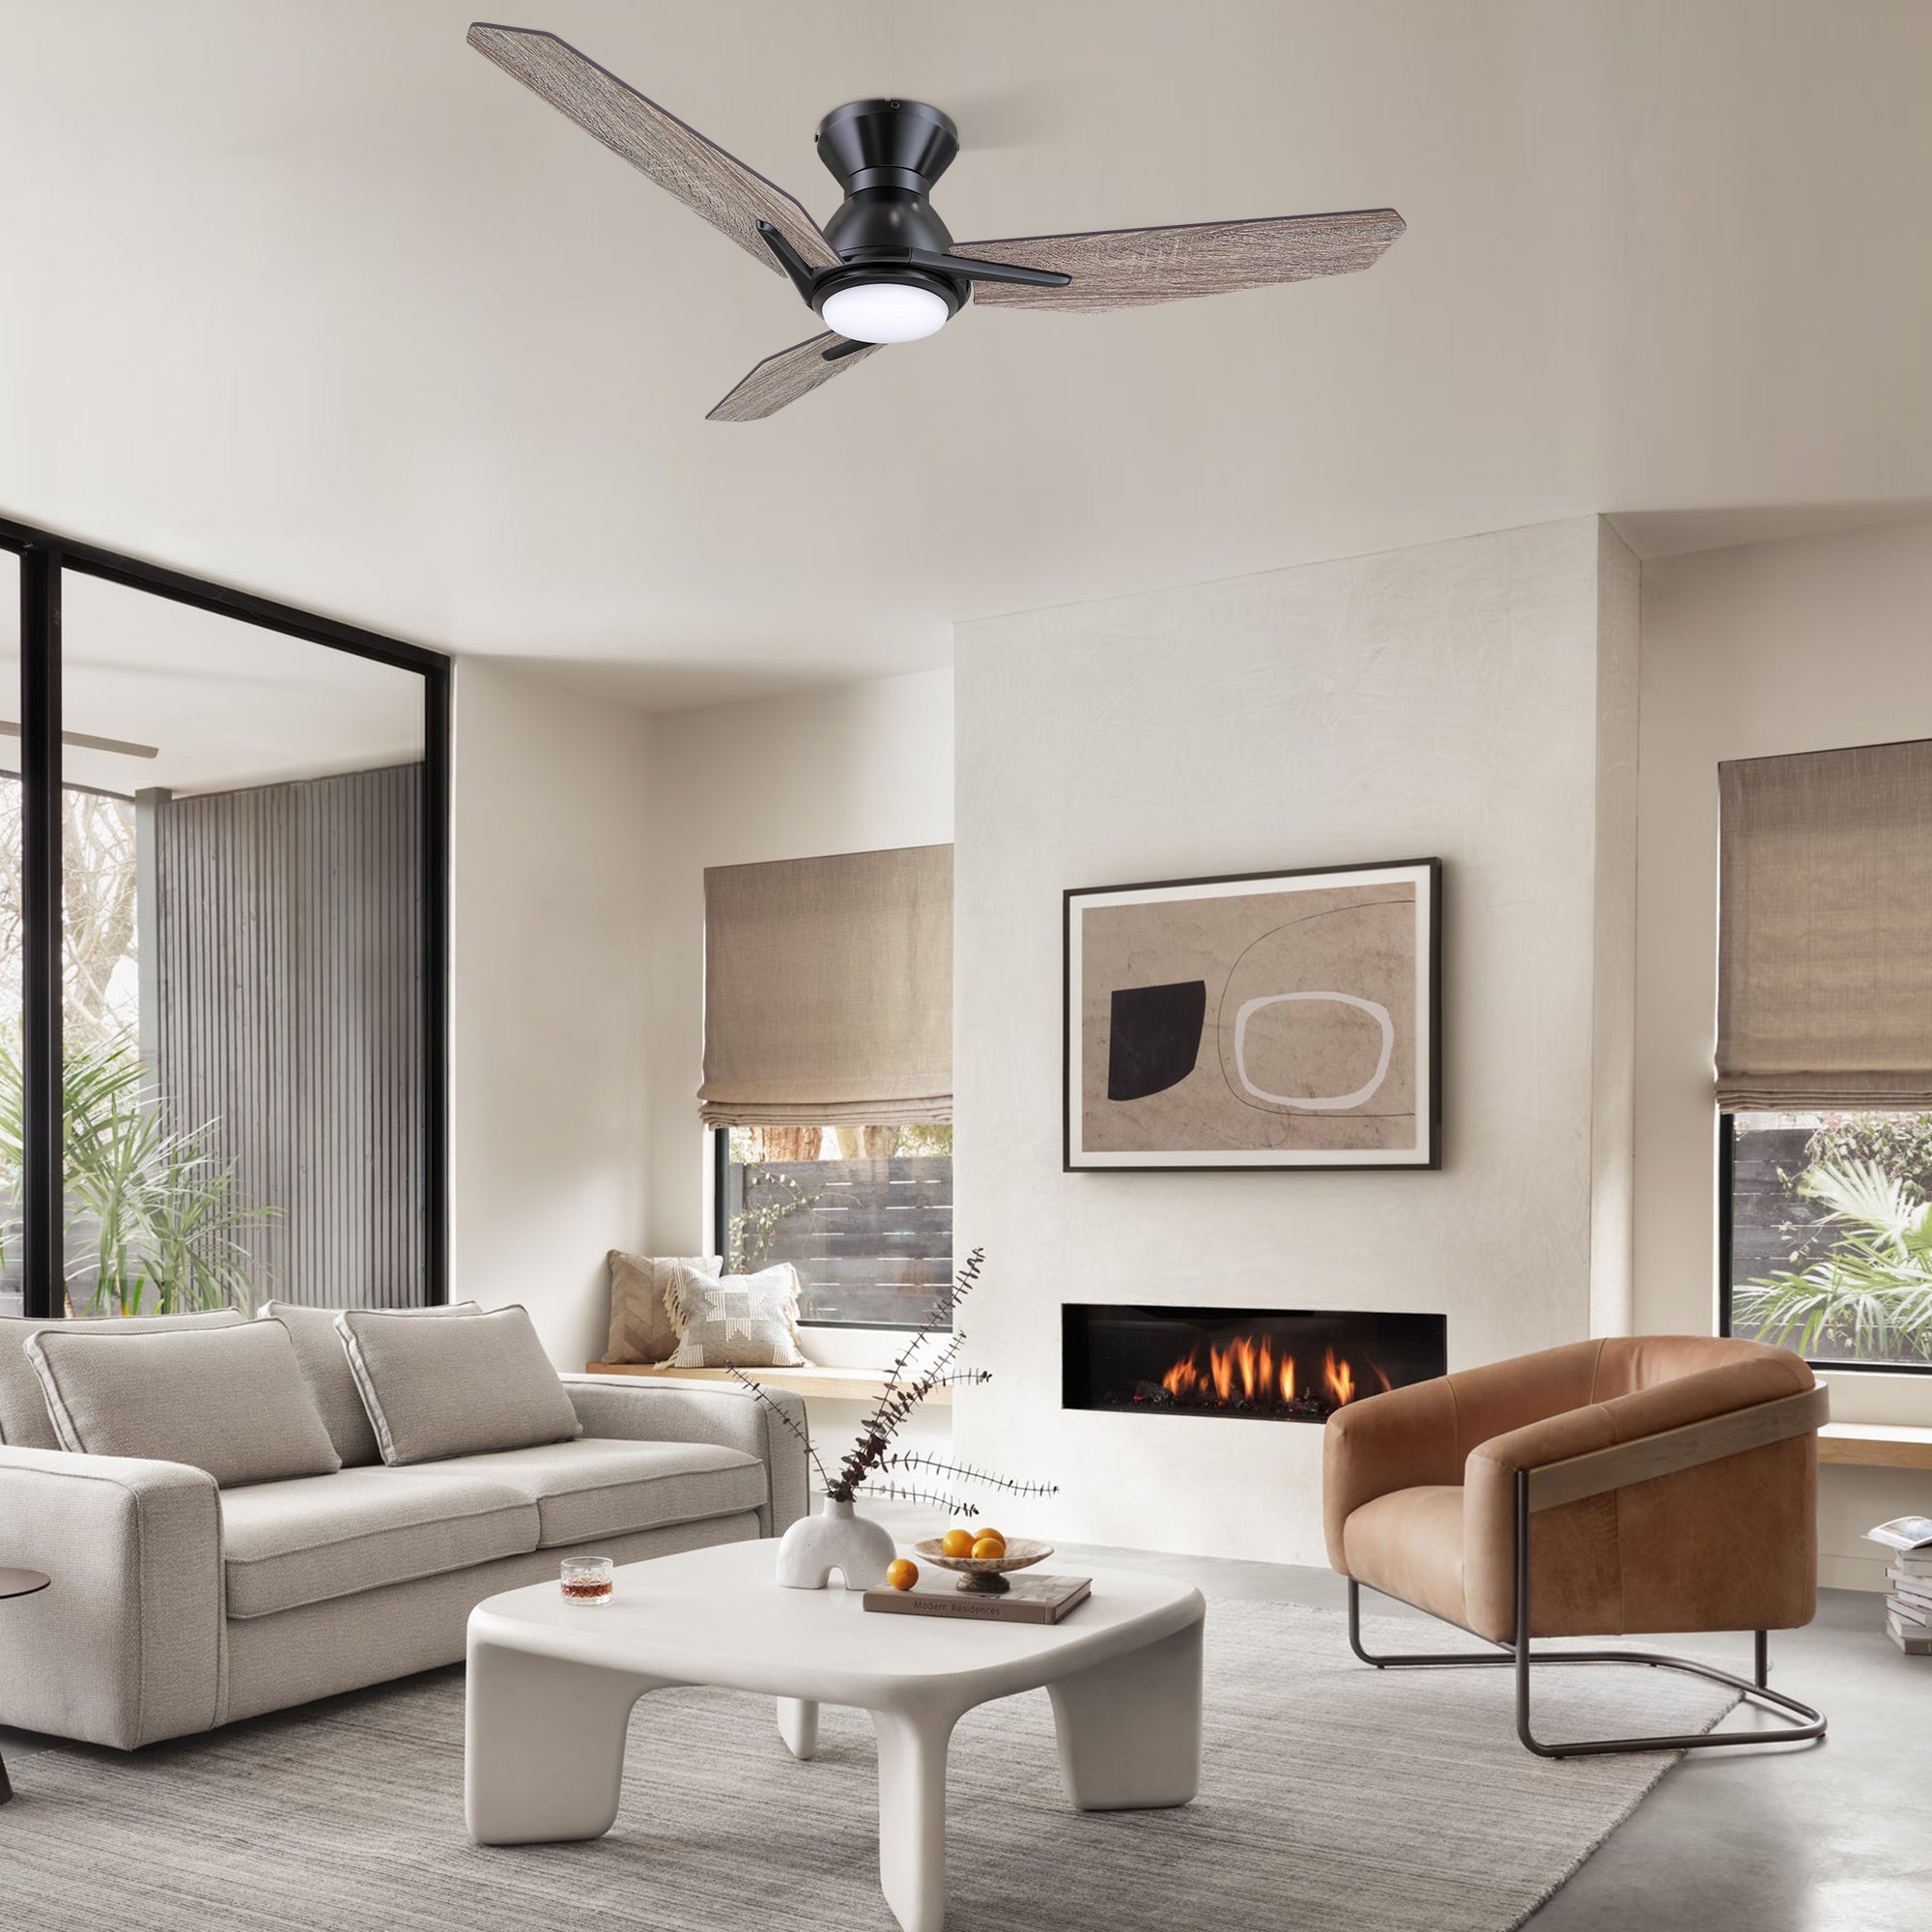 This Smafan Brooks 44 inch smart ceiling fan keeps your space cool, bright, and stylish. It is a soft modern masterpiece perfect for your large indoor living spaces. This Wifi smart ceiling fan is a simplicity designing with Black finish, use elegant Plywood blades and has an integrated 4000K LED daylight. The fan features Remote control, Wi-Fi apps, Siri Shortcut and Voice control technology (compatible with Amazon Alexa and Google Home Assistant ) to set fan preferences. 